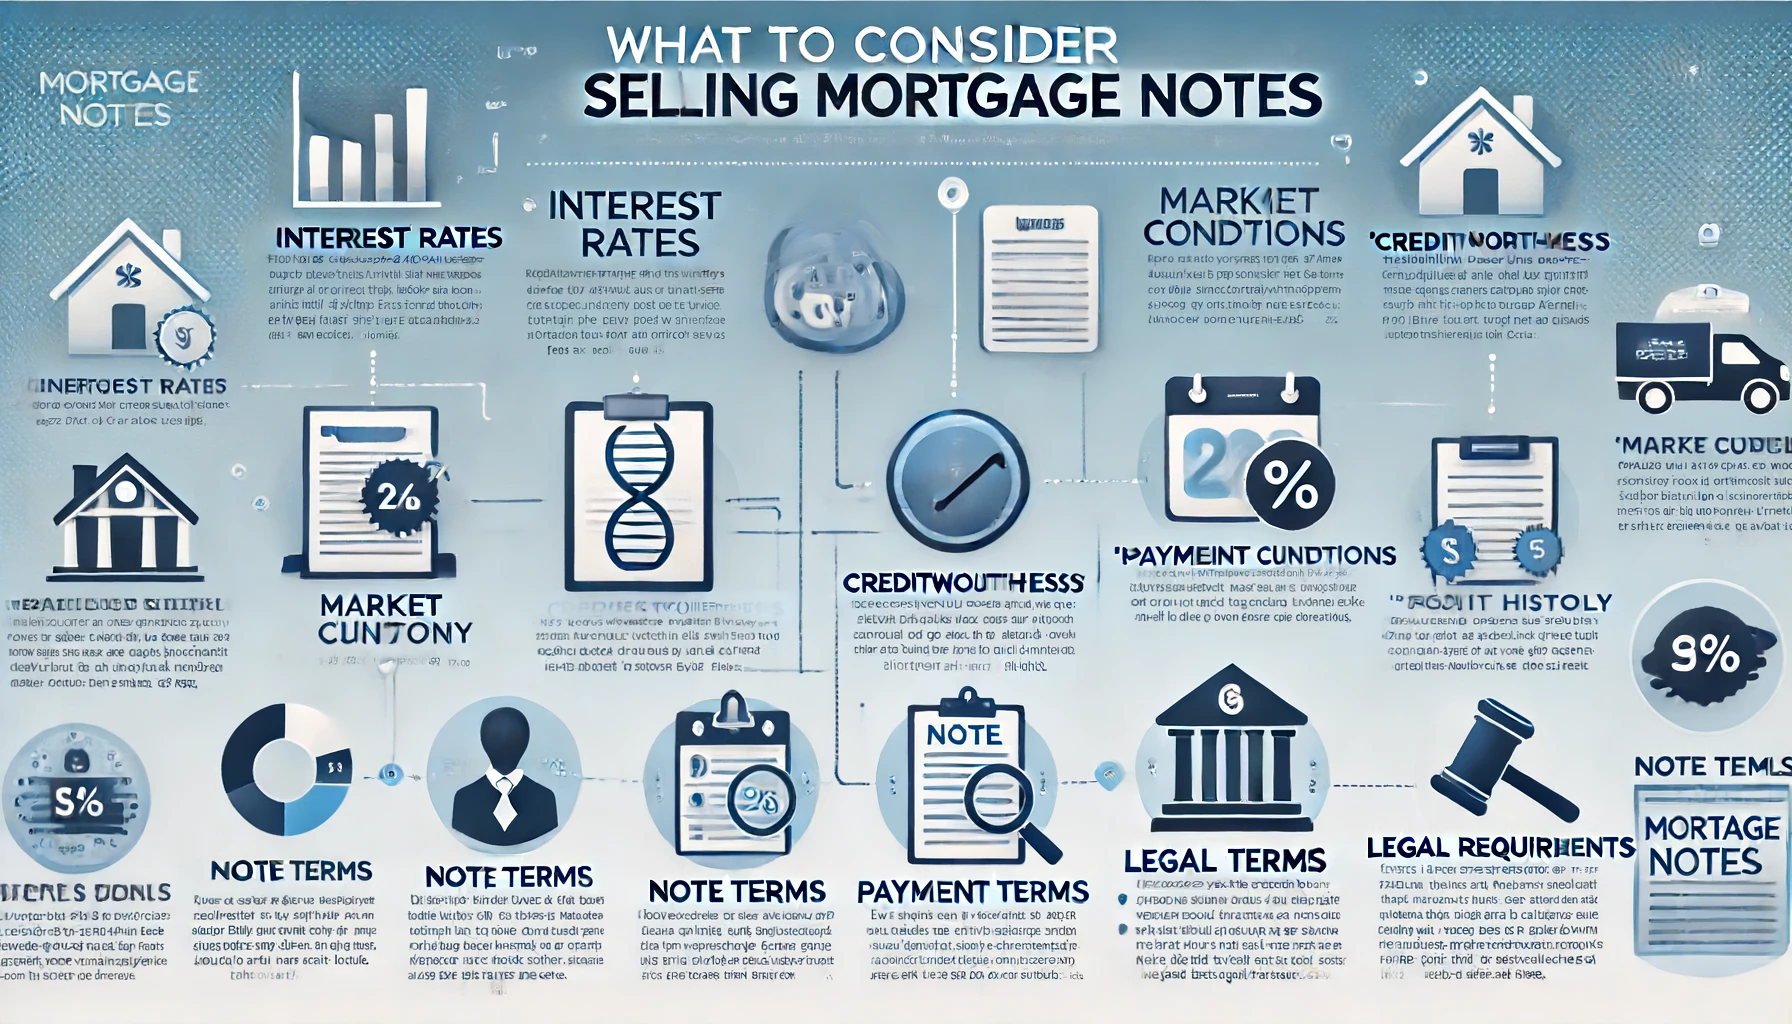 What to Consider When Selling Mortgage Notes